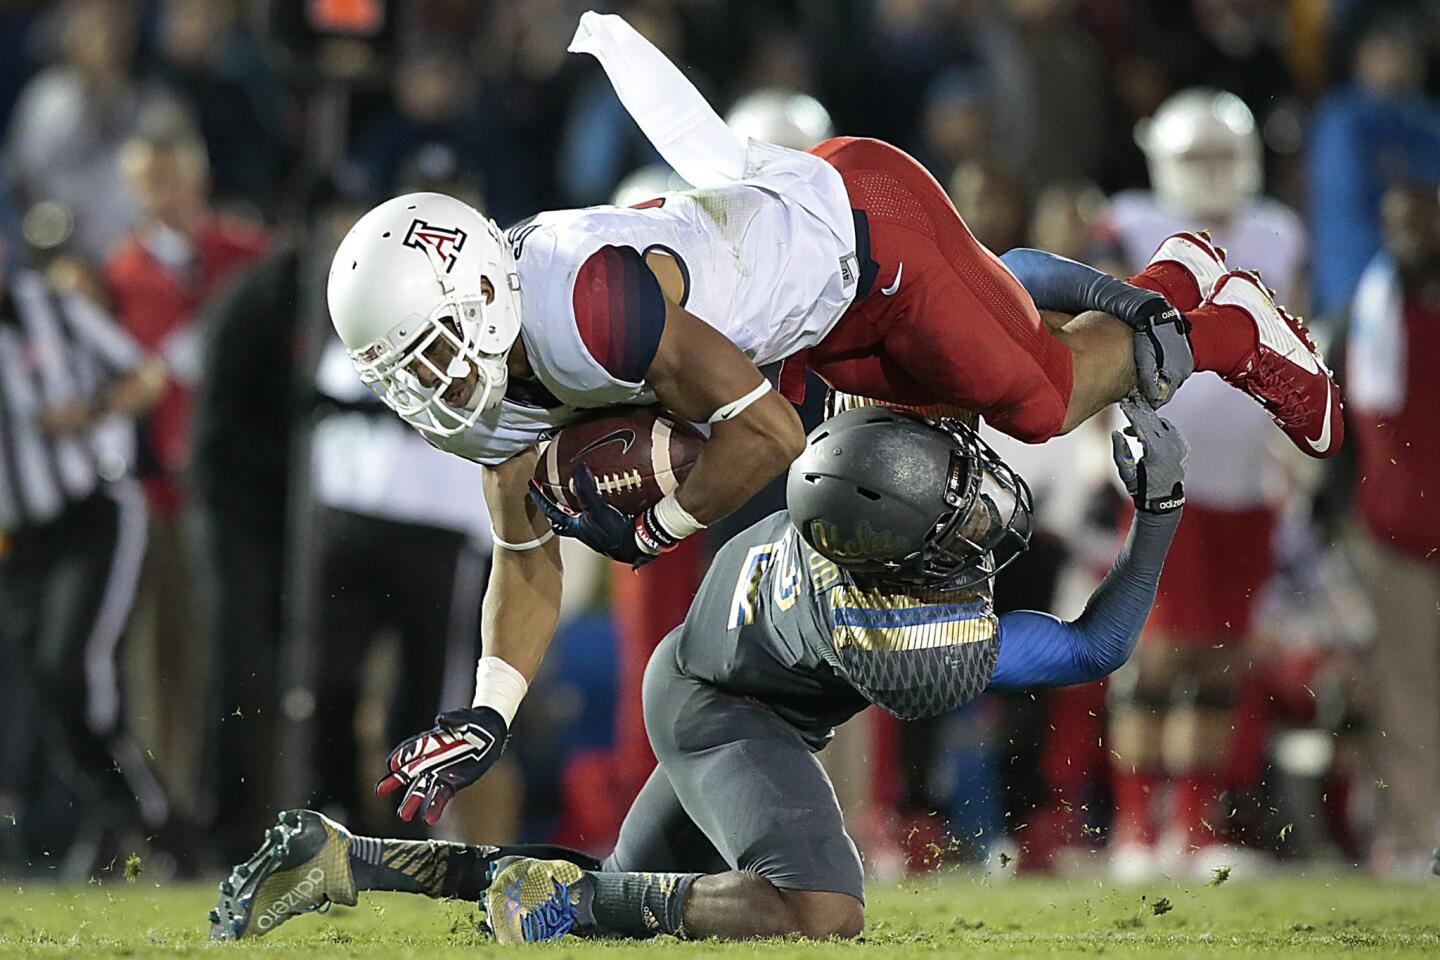 Bruins defensive back Jaleel Wadood brings down Wildcats receiver Trey Griffey in the fourth quarter.